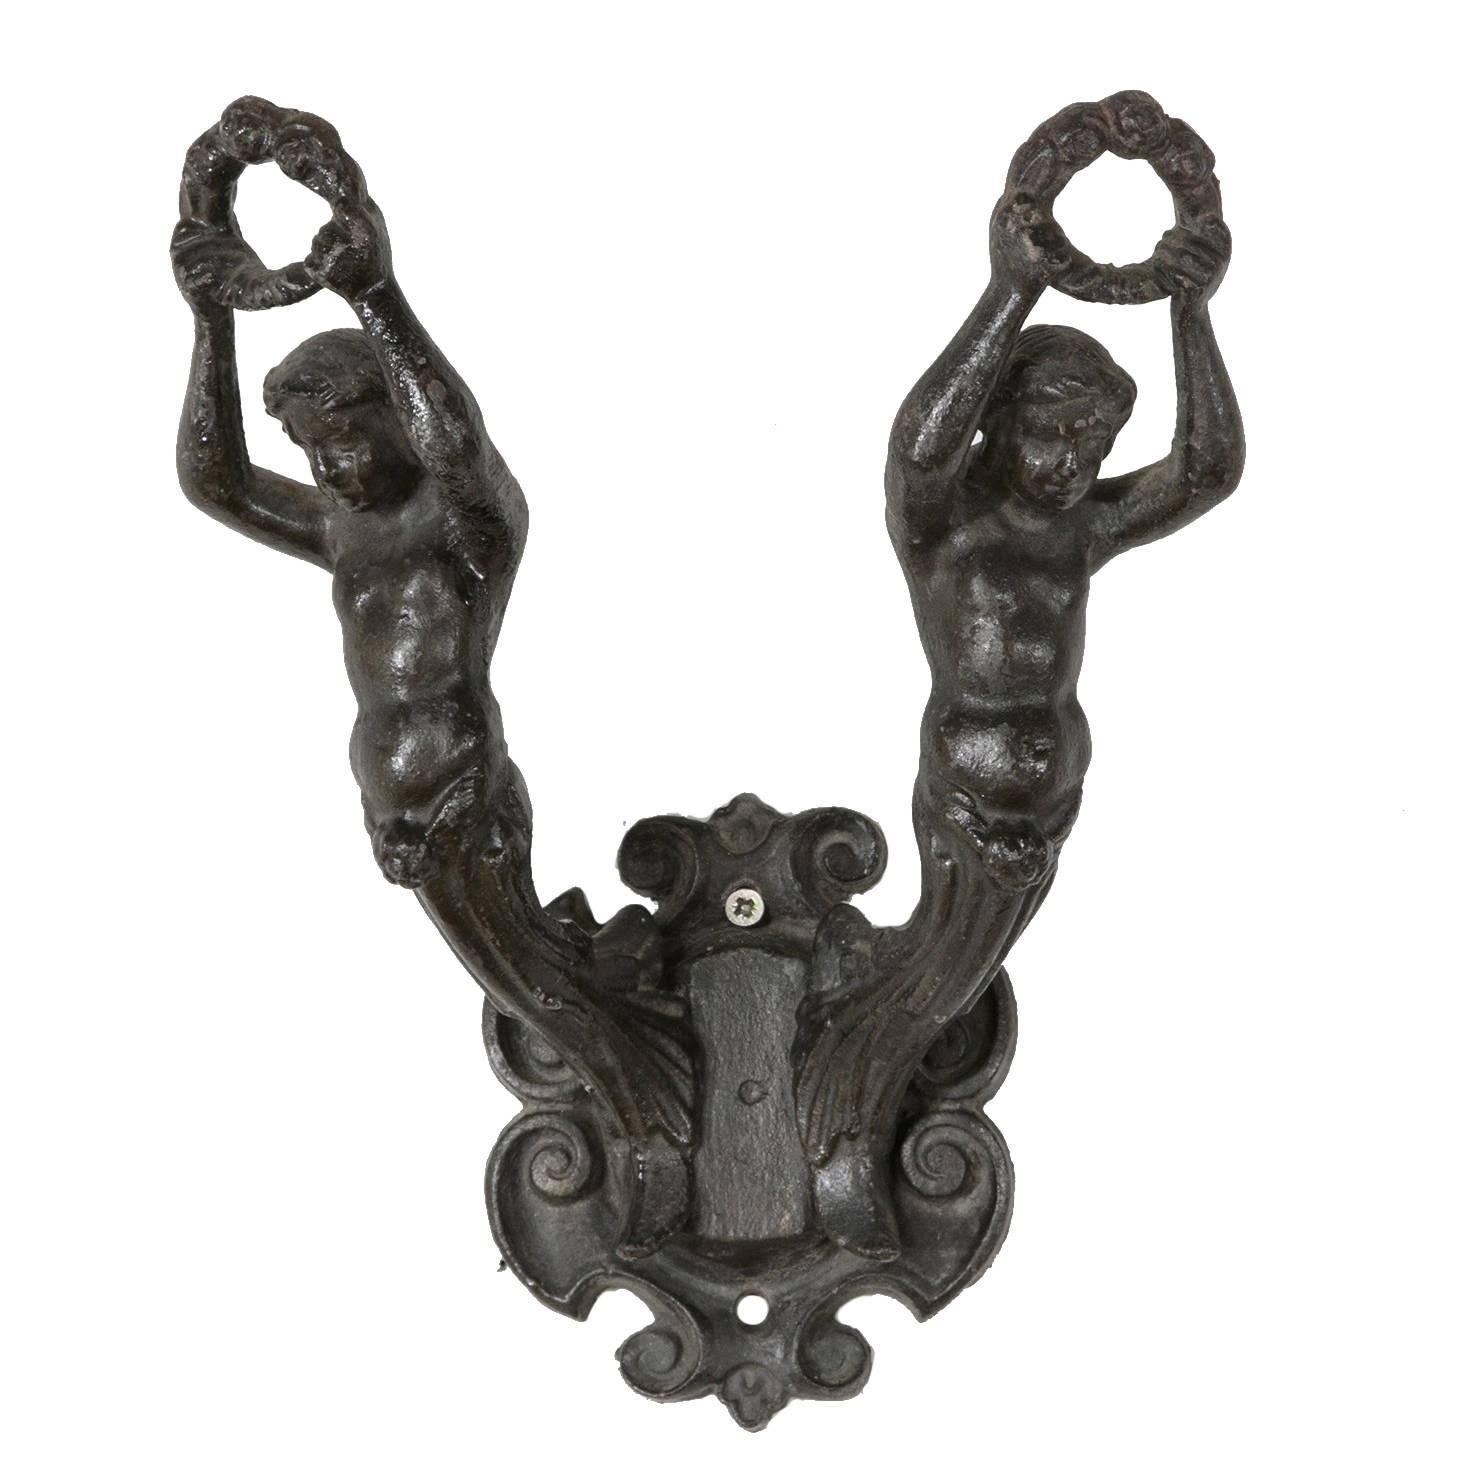 Large French Art Nouveau Period Iron Coat and Hat Hook with Two Classic Figures